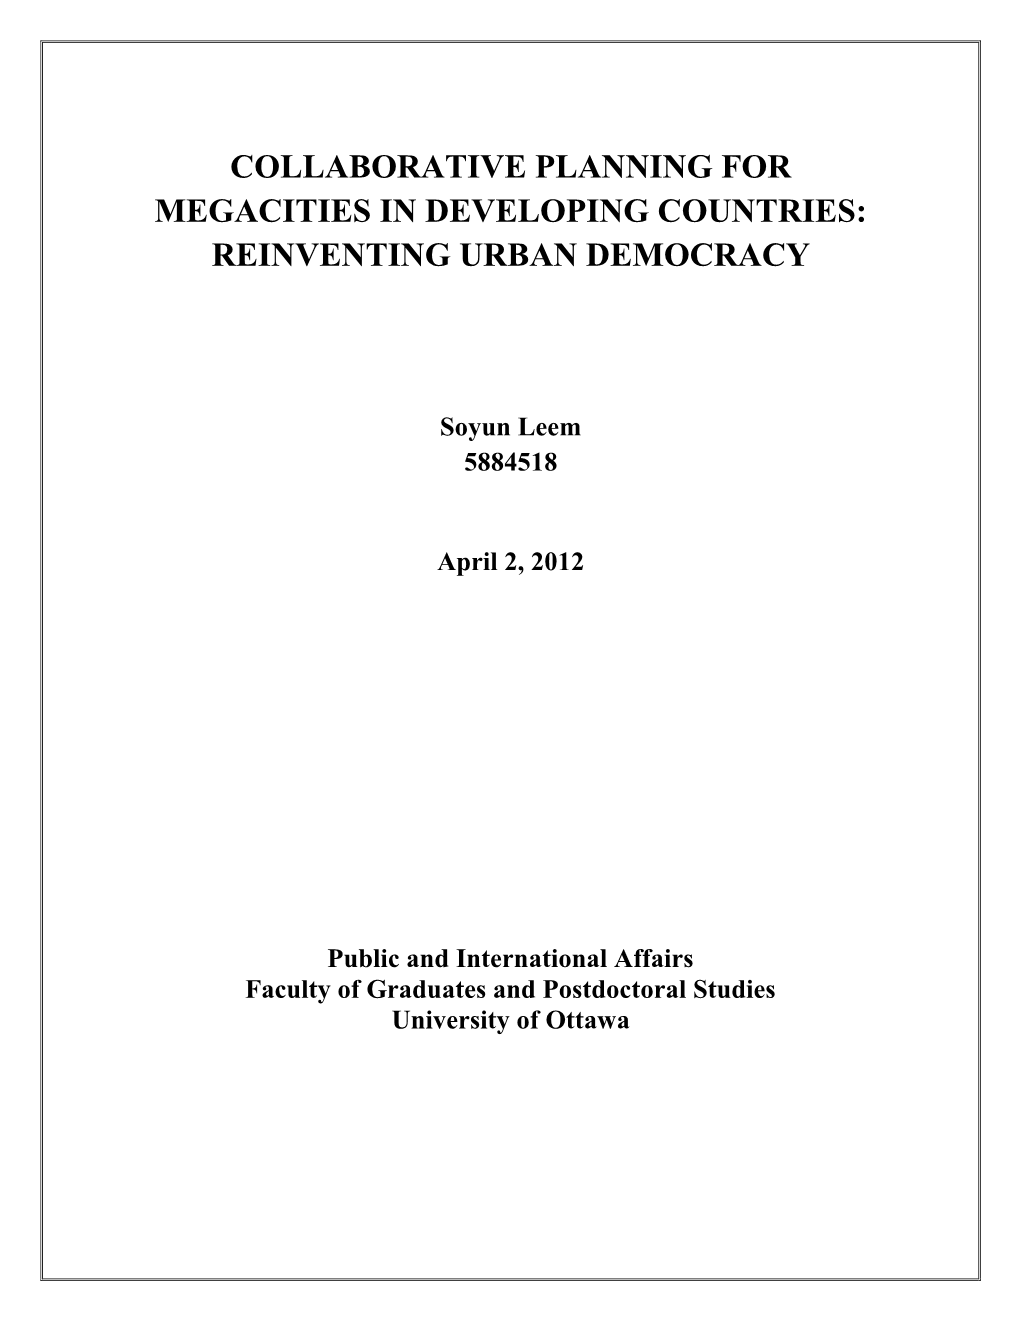 Collaborative Planning for Megacities in Developing Countries: Reinventing Urban Democracy